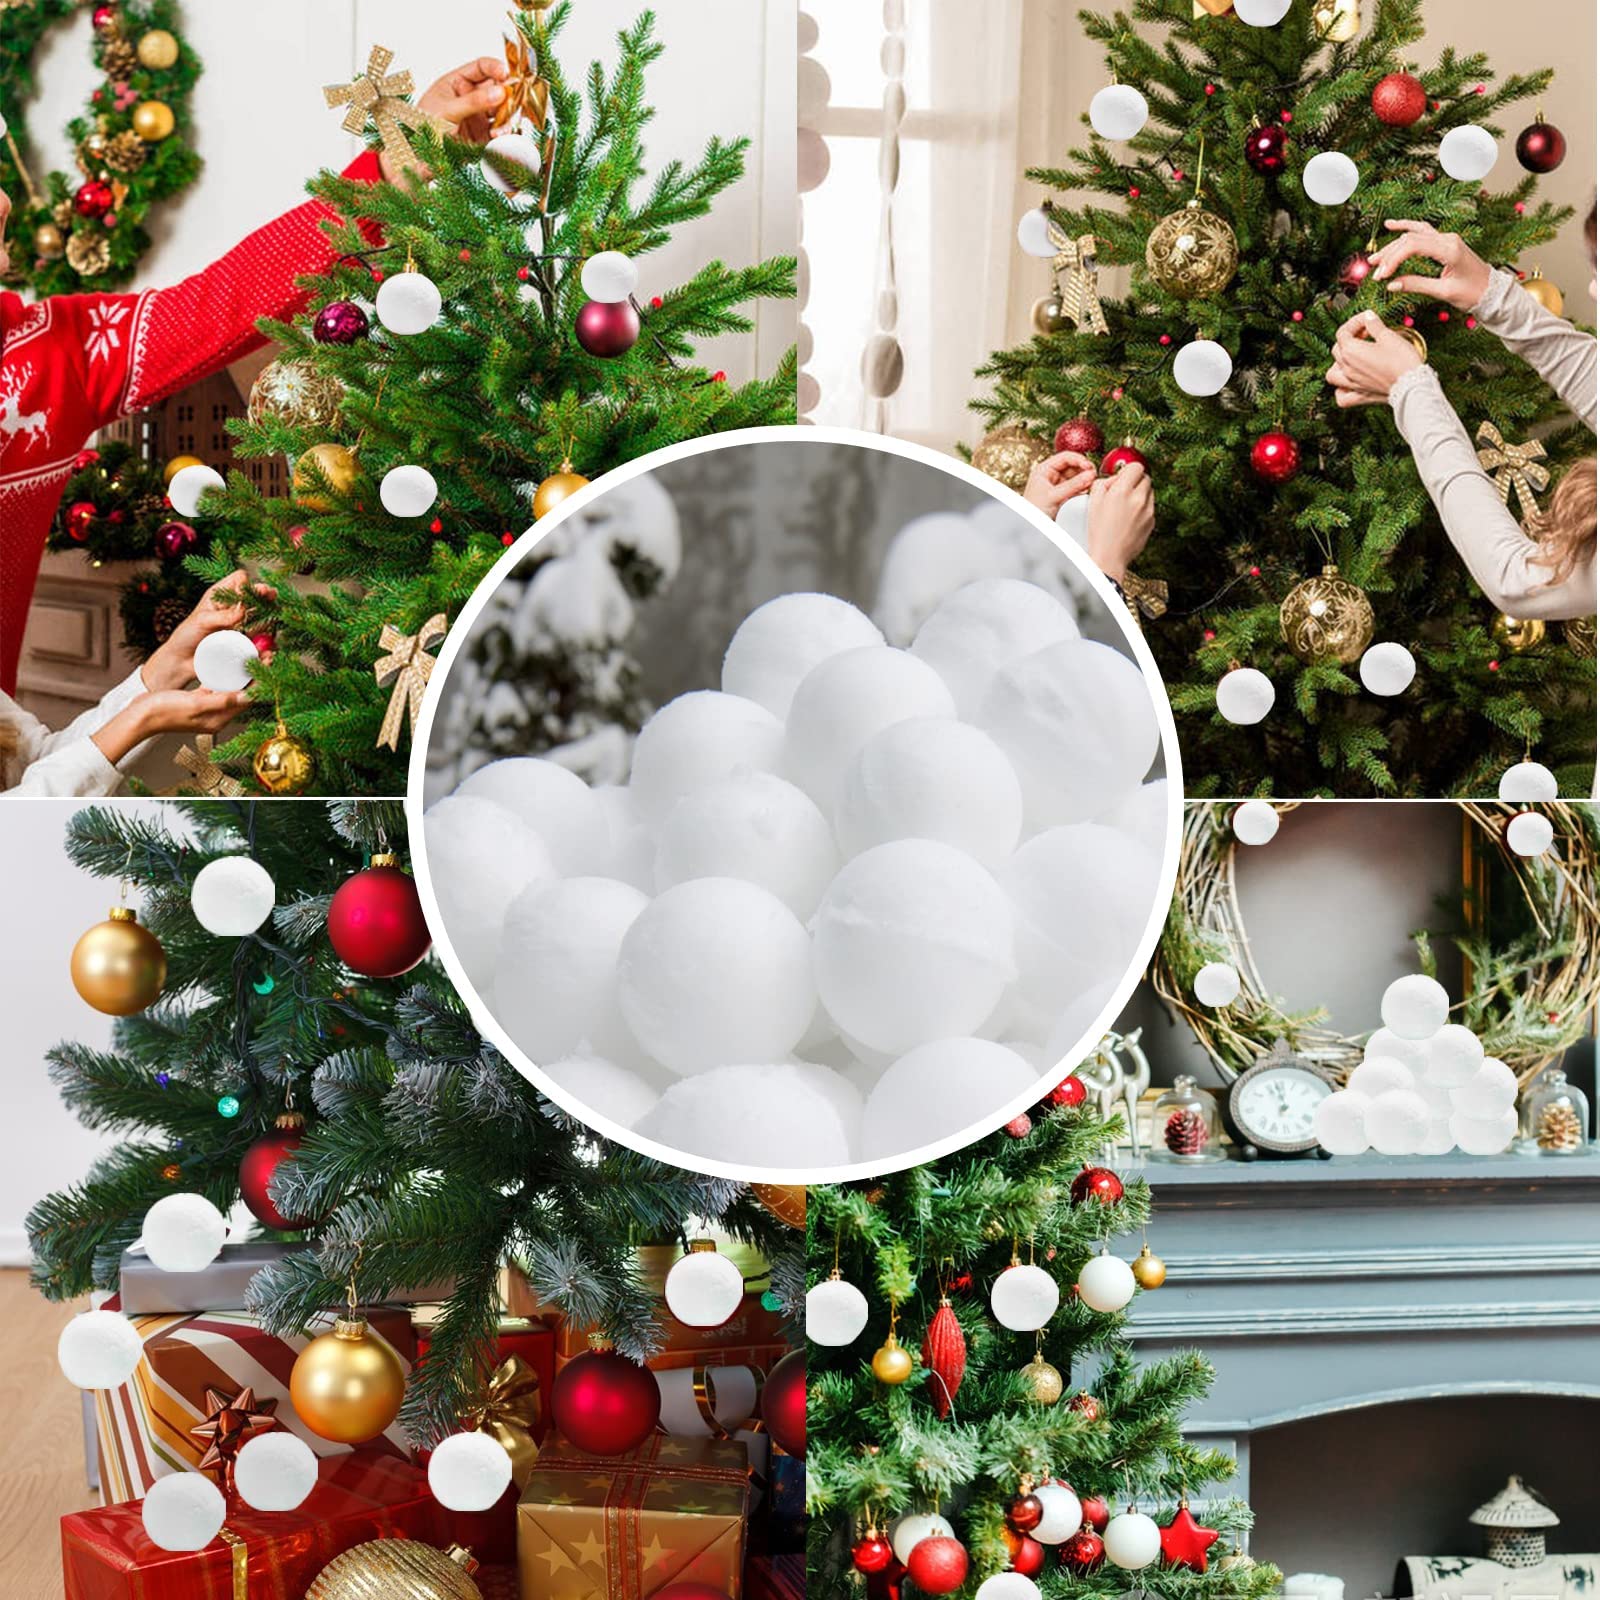 50 Pack Kids Snowball Indoor Snowball Fight,Fake Snowballs Winter Xmas Decoration,2.7 Inch Realistic White Plush Snow Balls for Kids Adults Indoor Outdoor Game